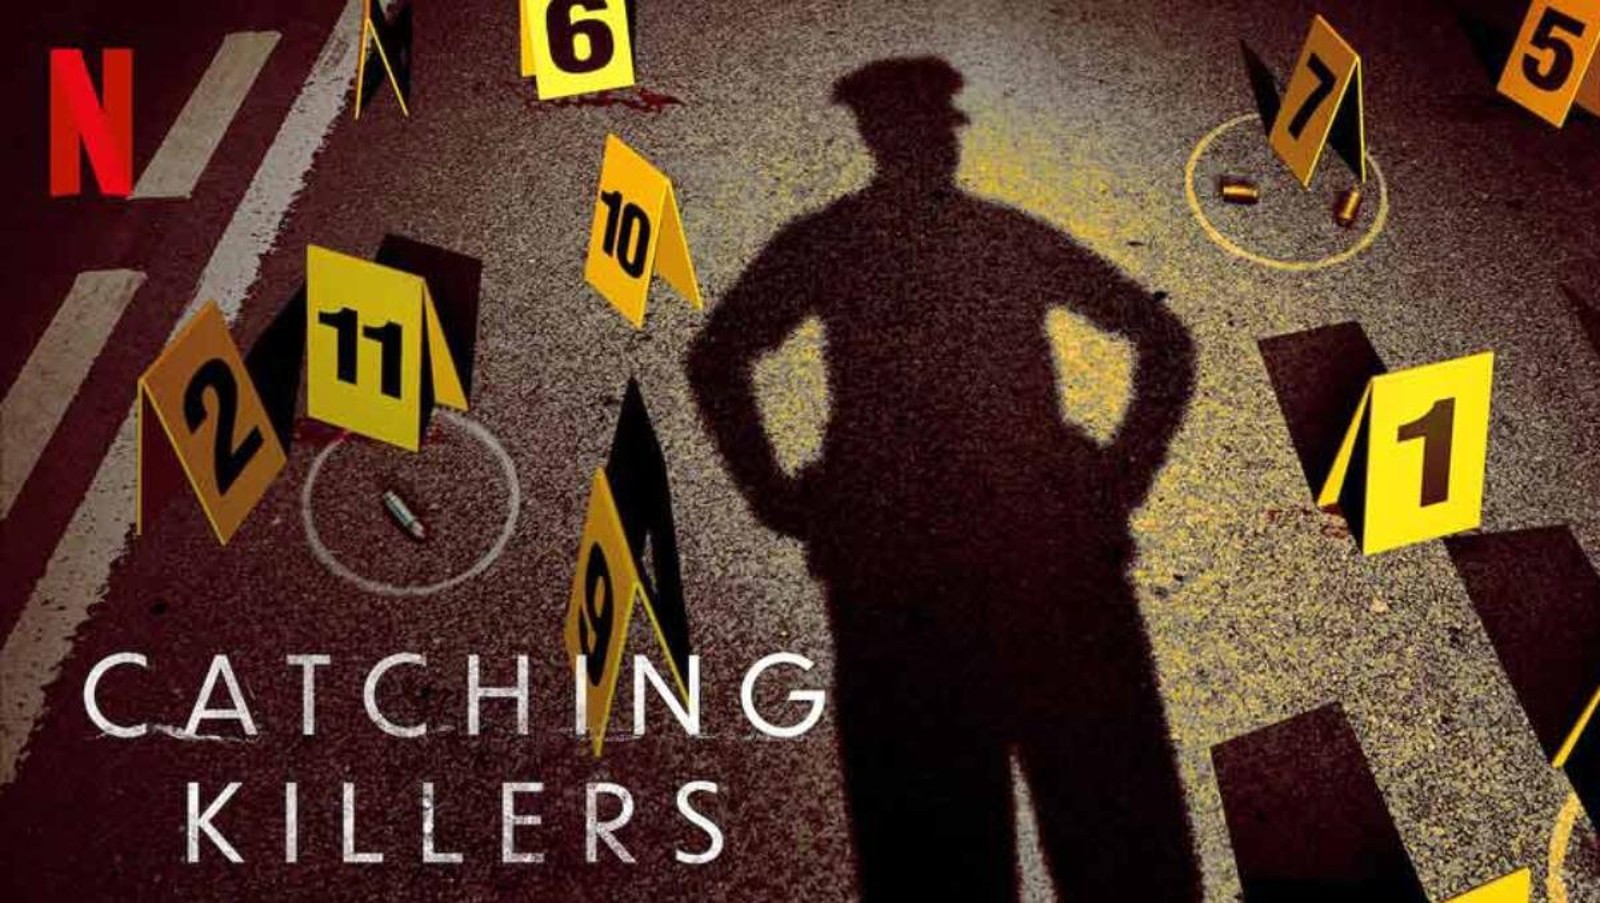 Season two of Catching Killers lands on Netflix + The importance of democratizing access to tech according to a US congressman | Enterprise